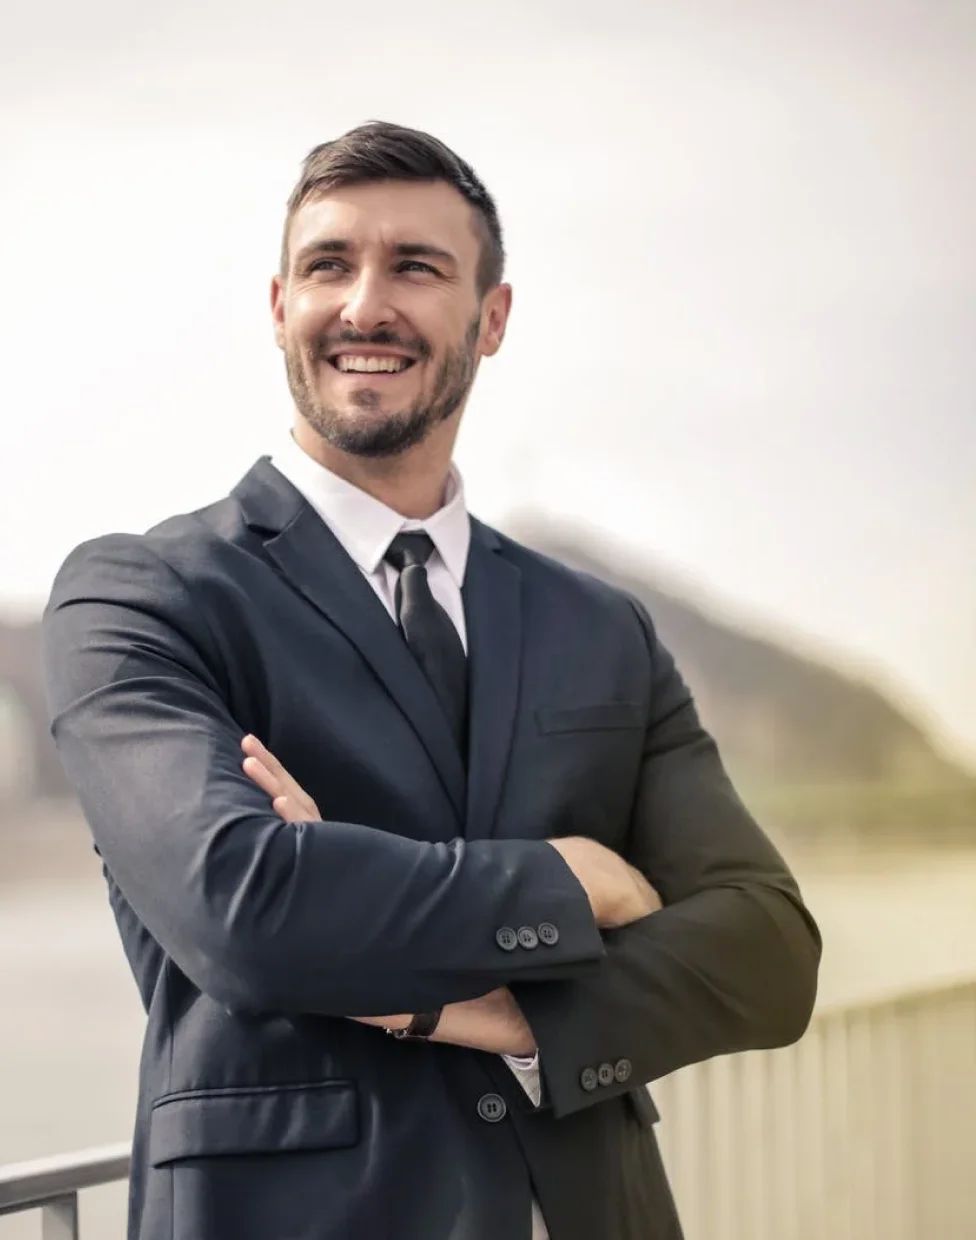 smiling expert wearing suit showing confidence